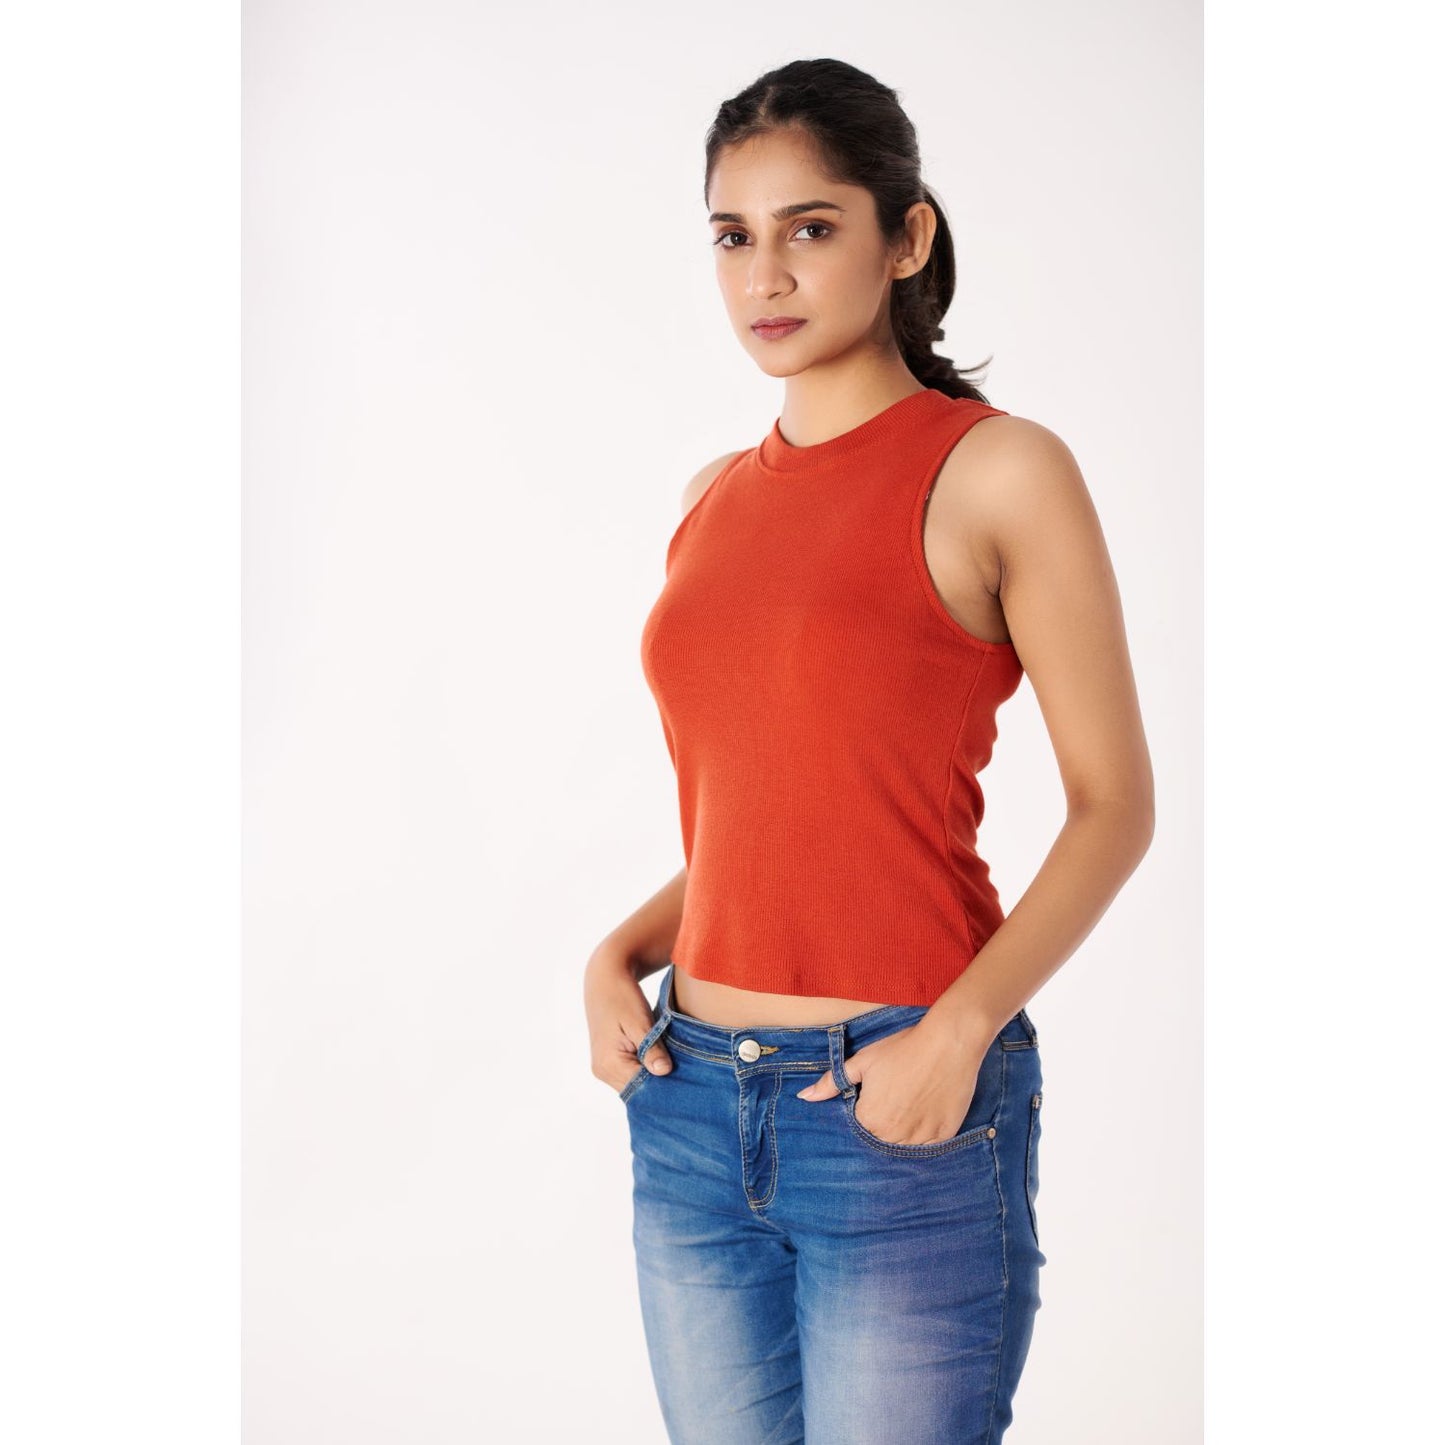 Sleeveless Hosiery Blouses - Brick Red - Blouse featured